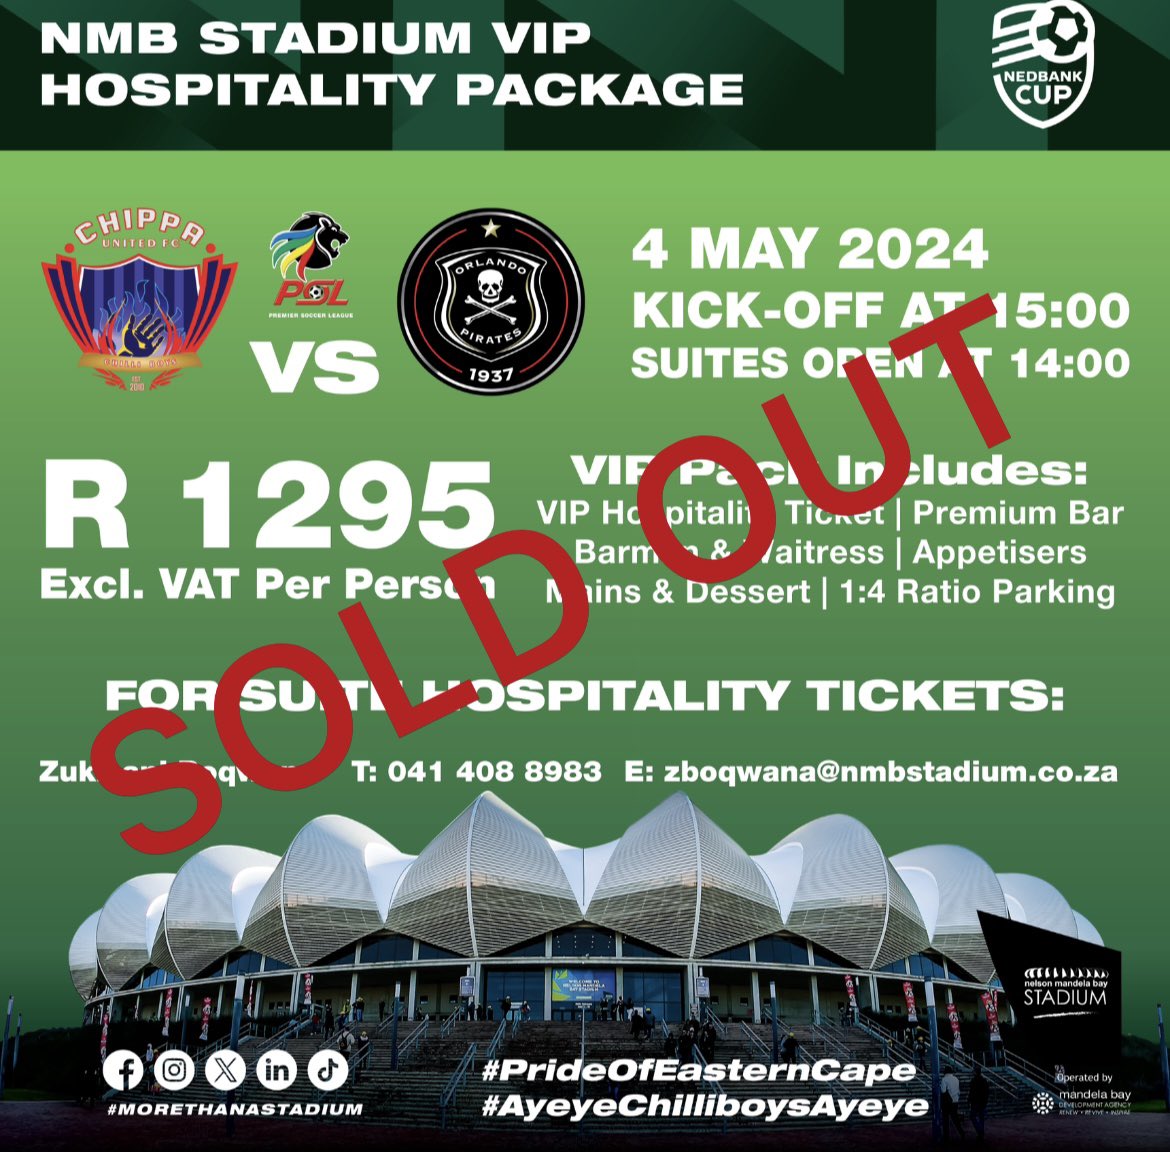 VIP Hospitality tickets for the Nedbank Cup Semifinal are officially sold out. 

Thank you to everyone for the support, Saturday we rock n roll 😎

#ourstadium #NedbankCup #Gqeberha